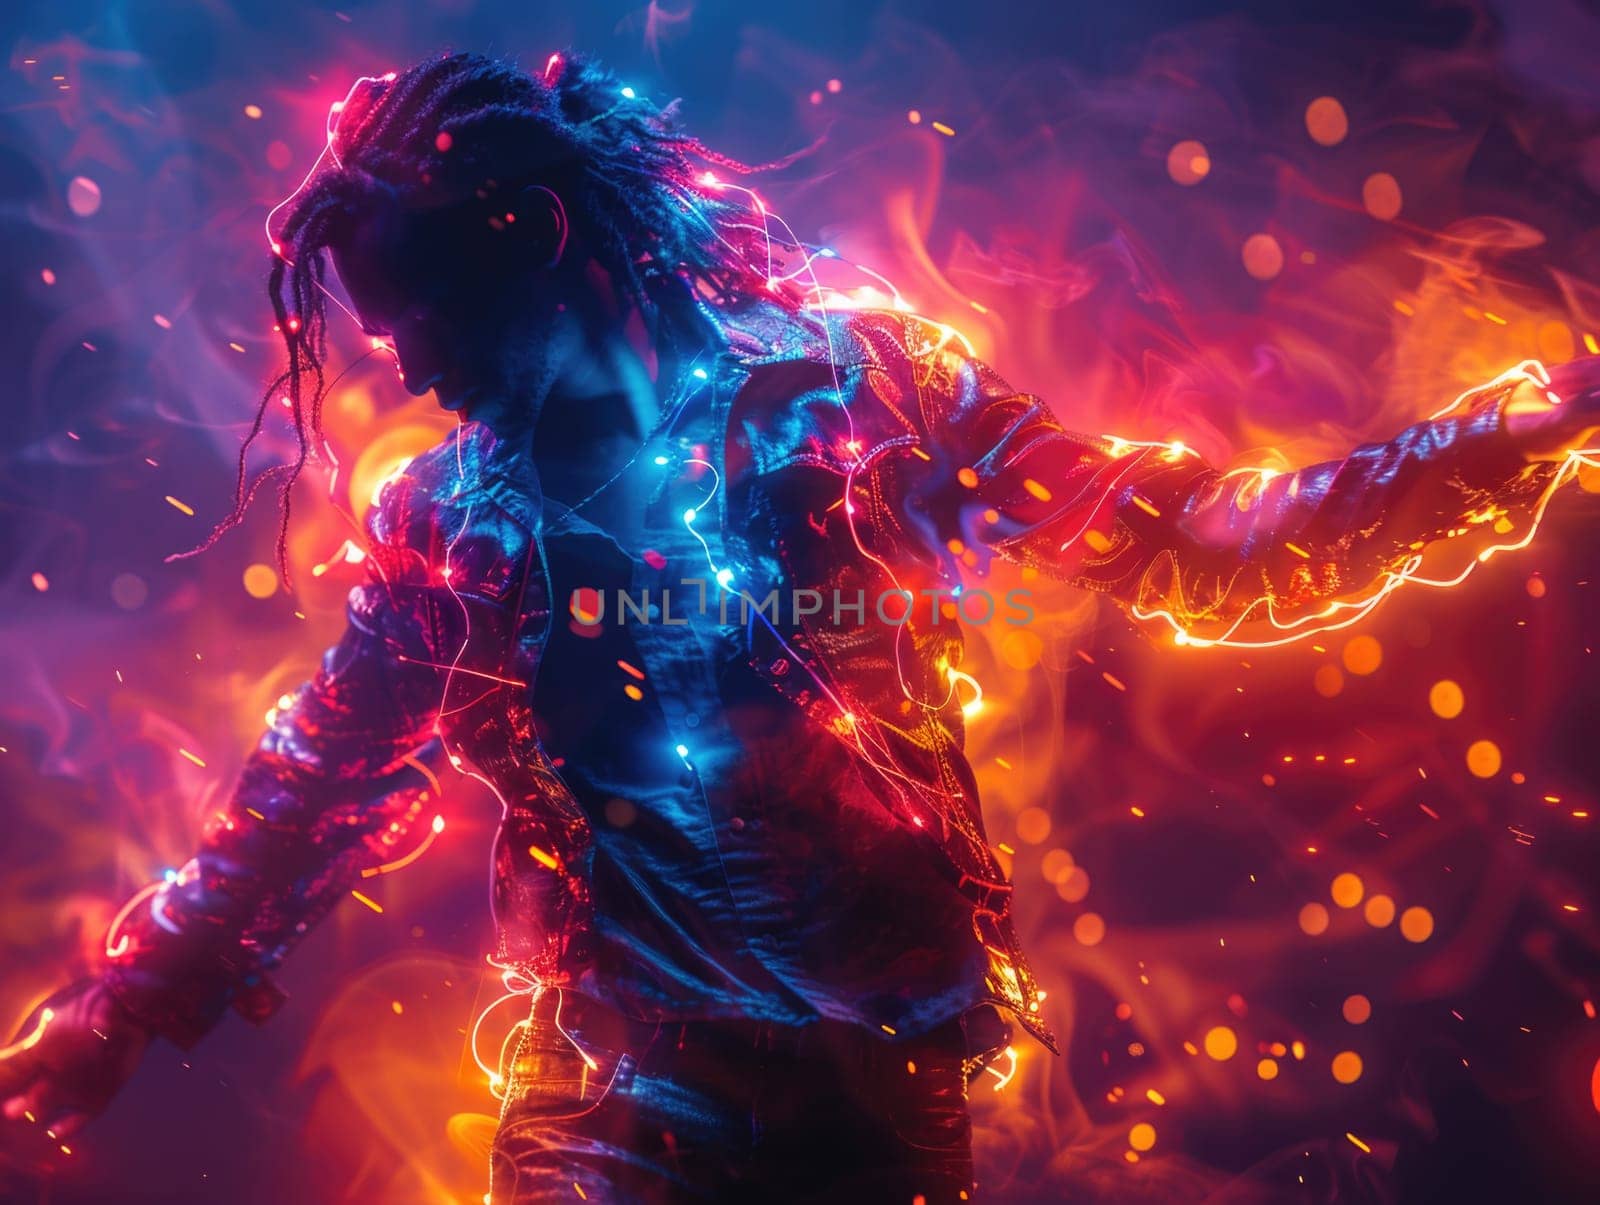 Man With Dreadlocks in Front of Colorful Background by but_photo